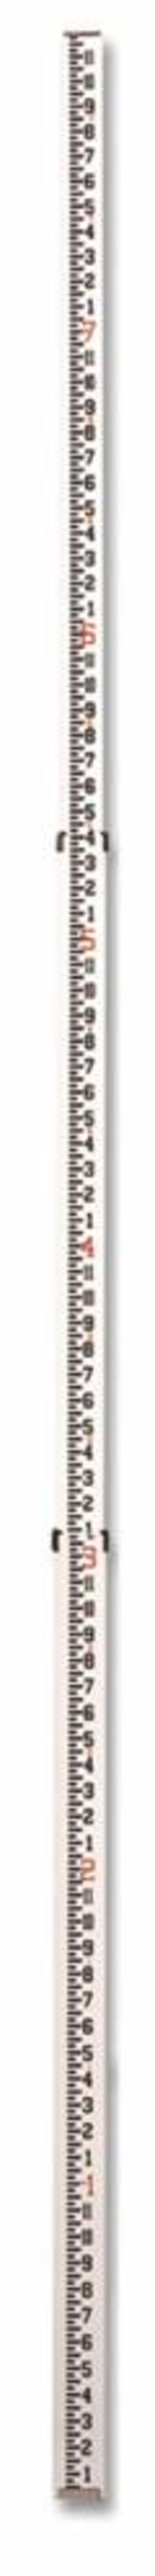 CST Berger 8 Ft. Aluminum Telescoping Rod 3-Section Inches / 8ths, large image number 0